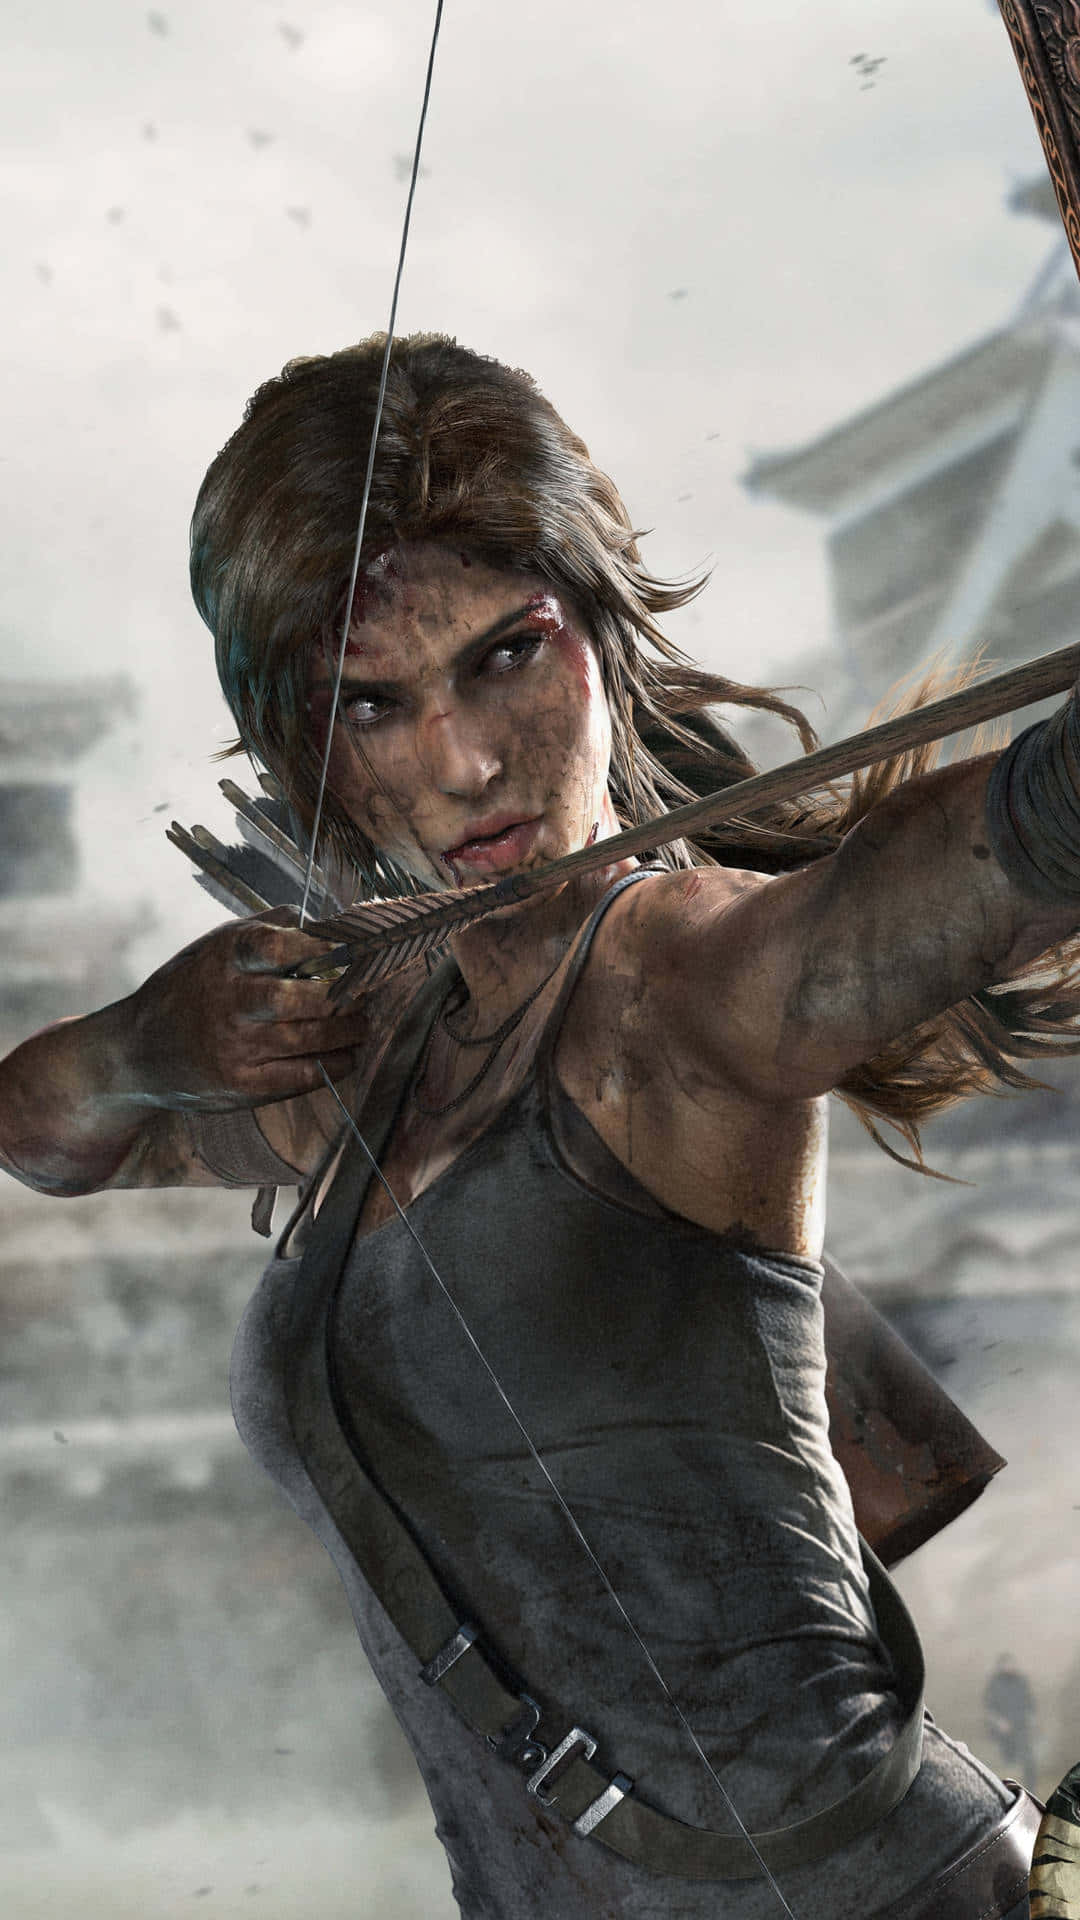 The Tomb Raider Is Holding An Arrow